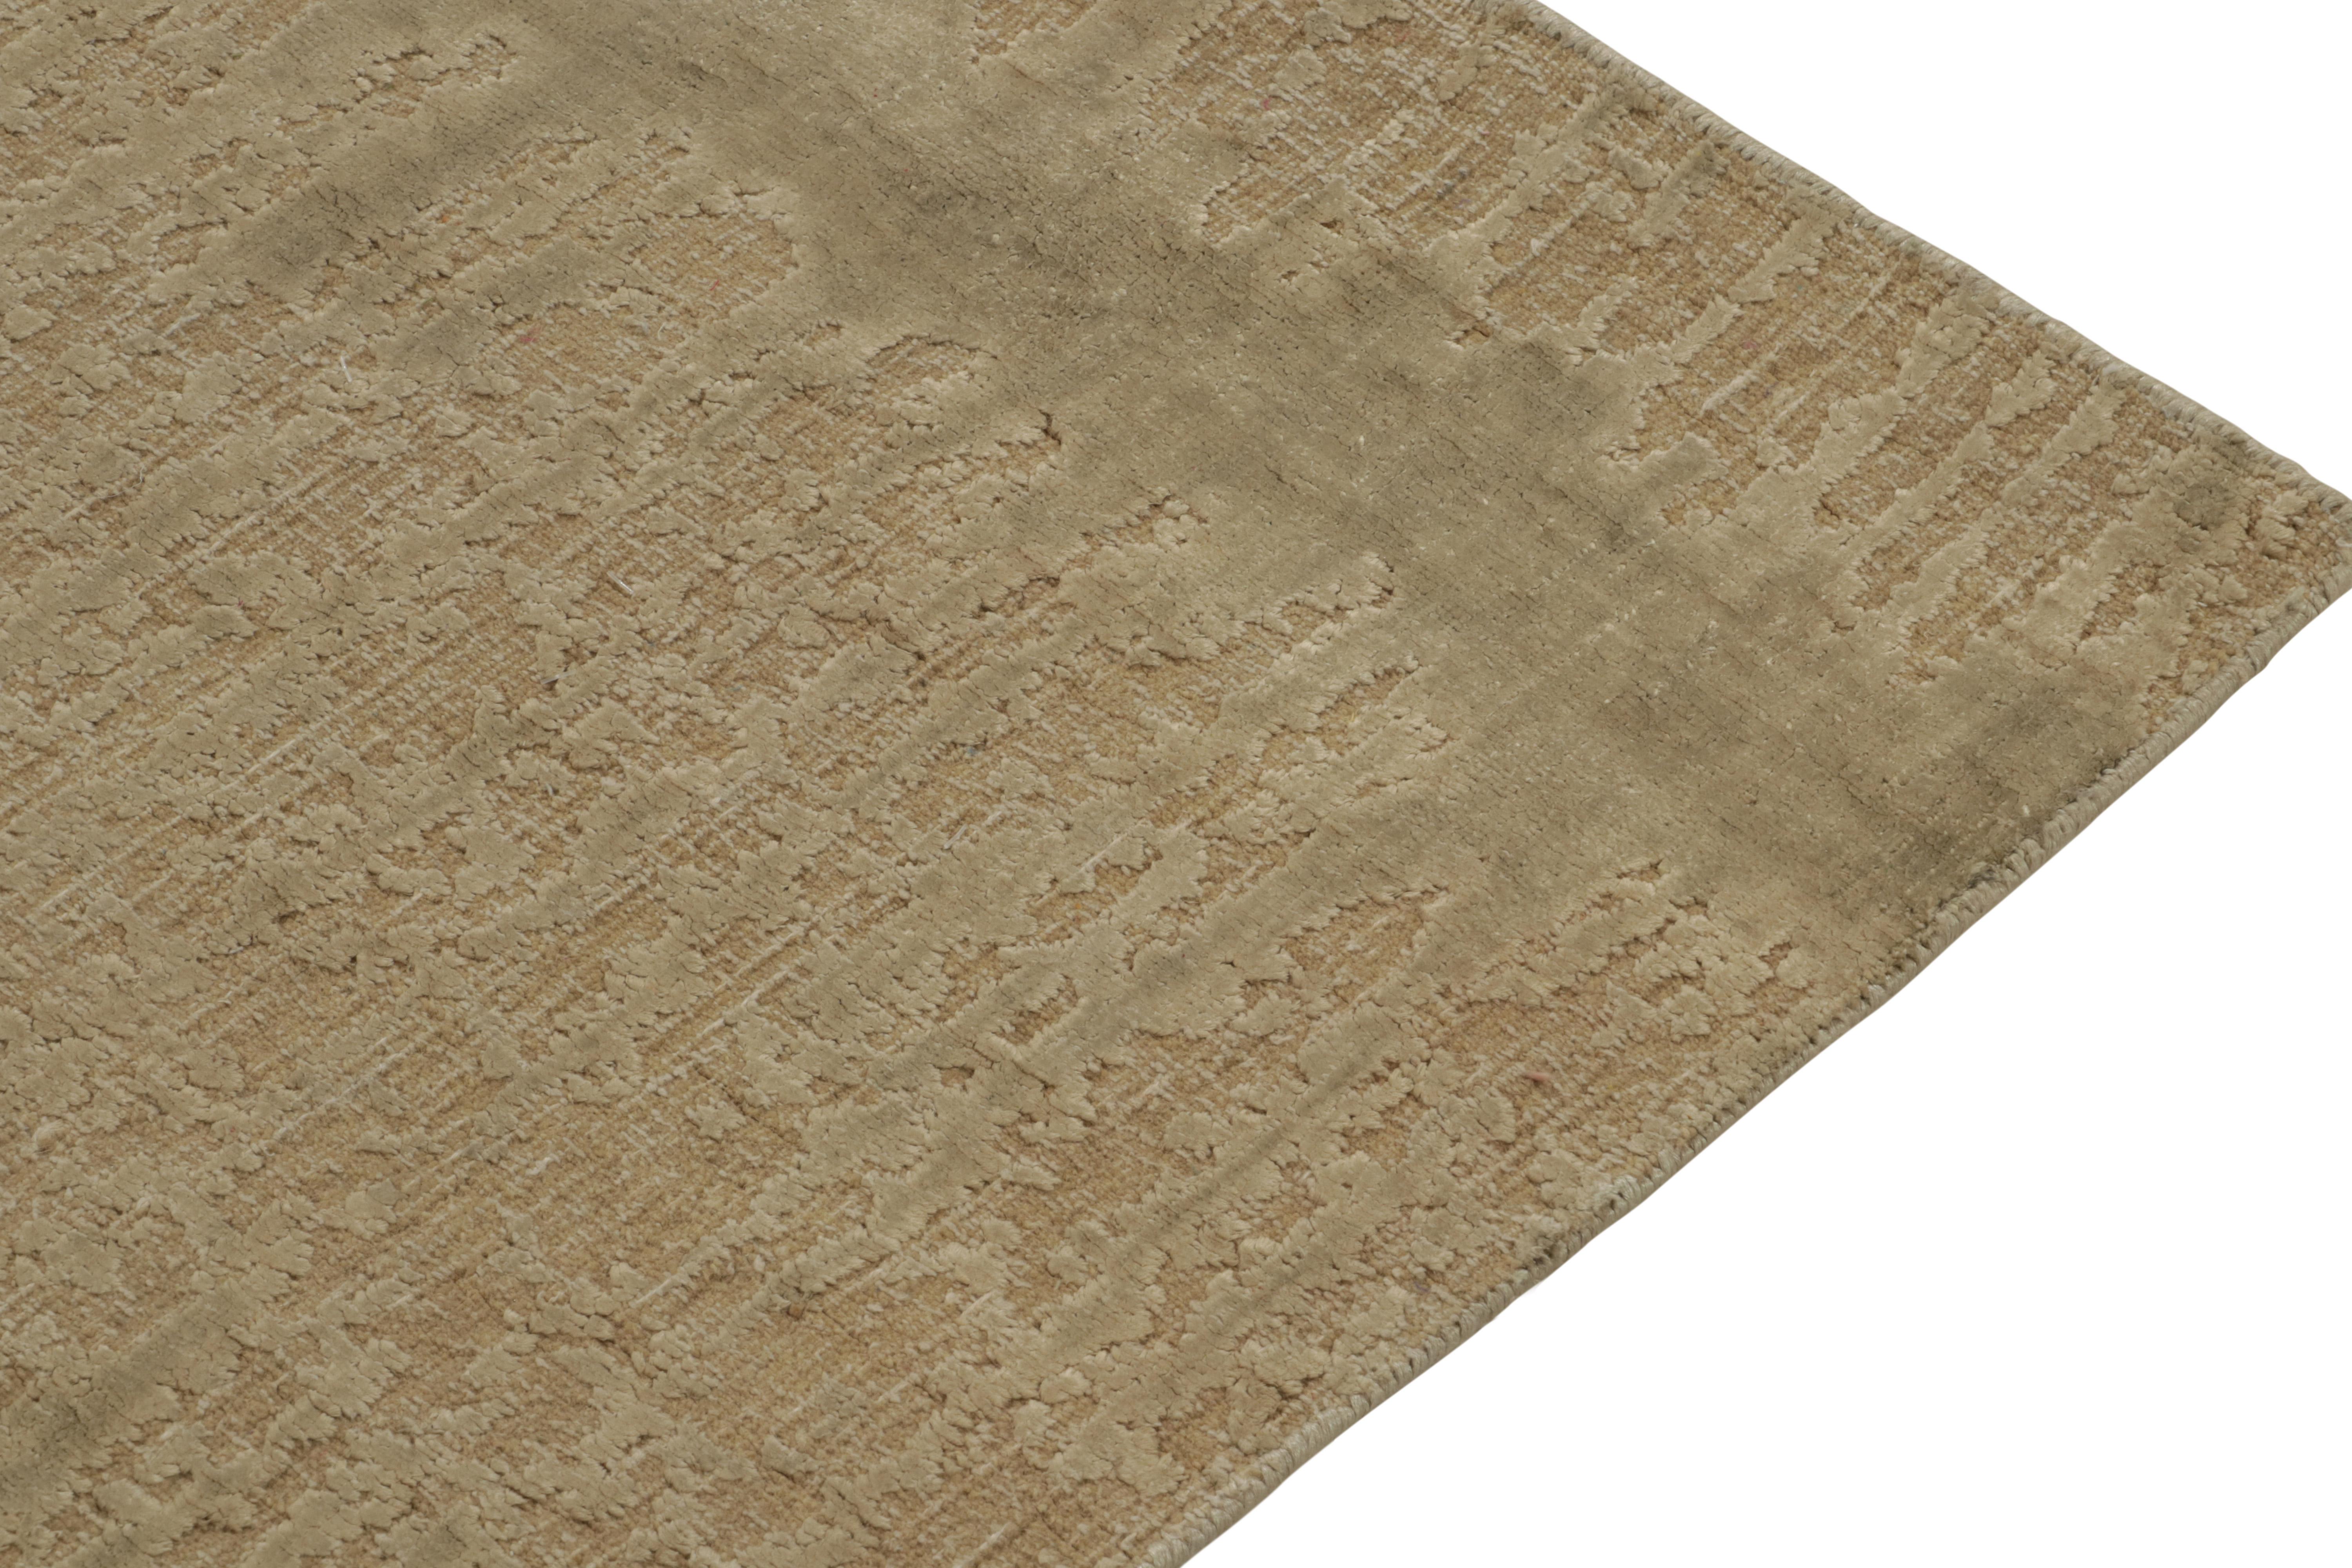 Rug & Kilim’s Modern Runner in Beige-Brown High-Low Abstract Pattern In New Condition For Sale In Long Island City, NY